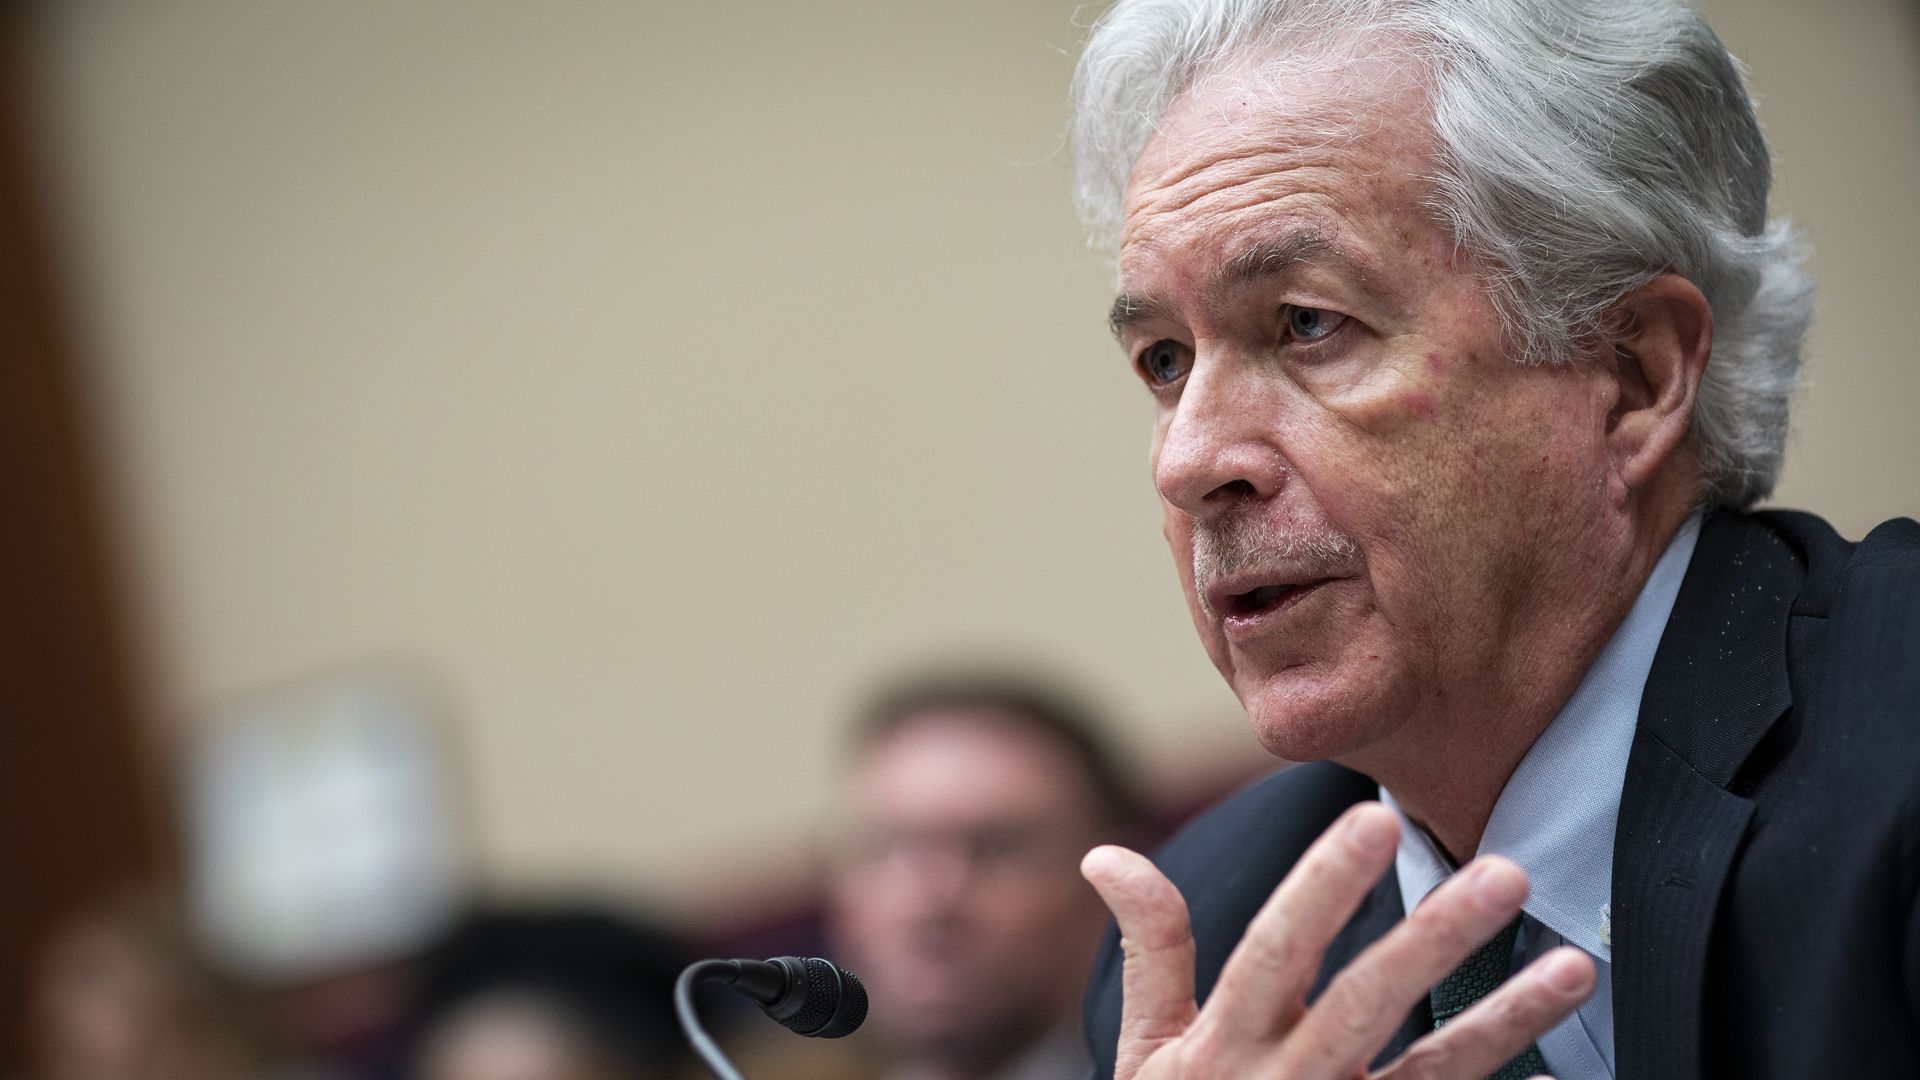 CIA Director William Burns speaking during a congressional hearing in March 2022.